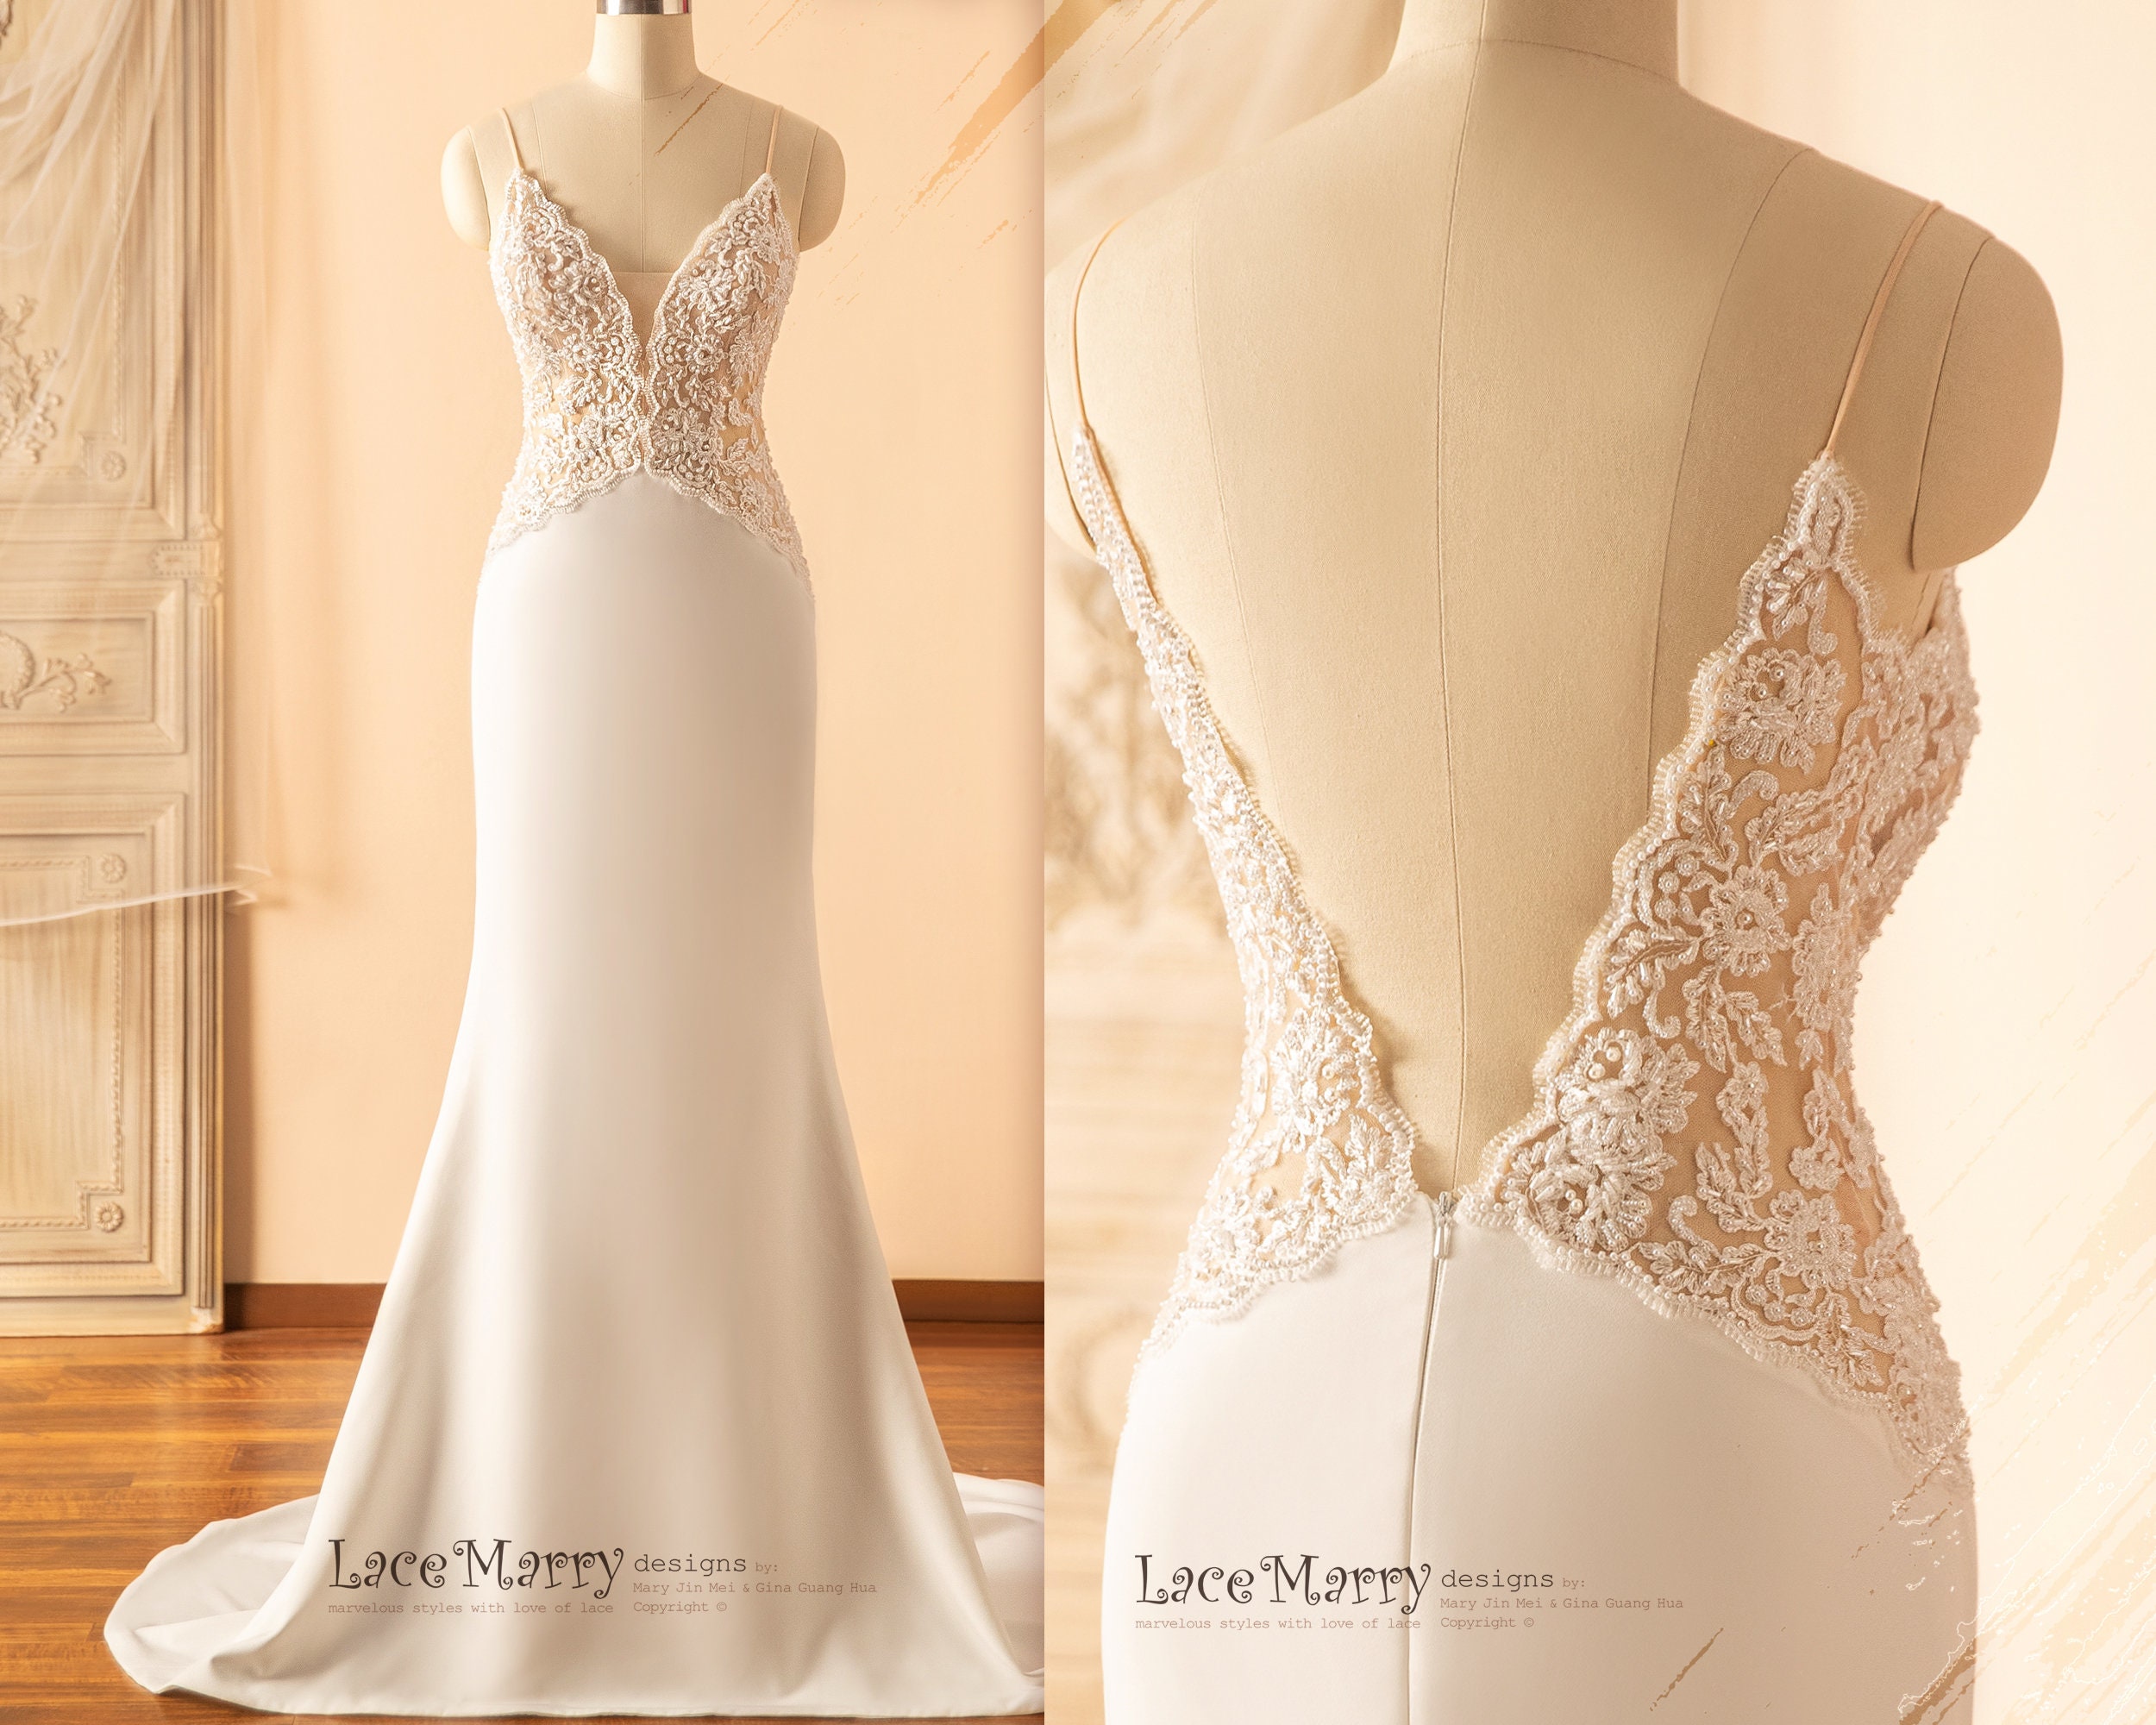 LaceMarry 